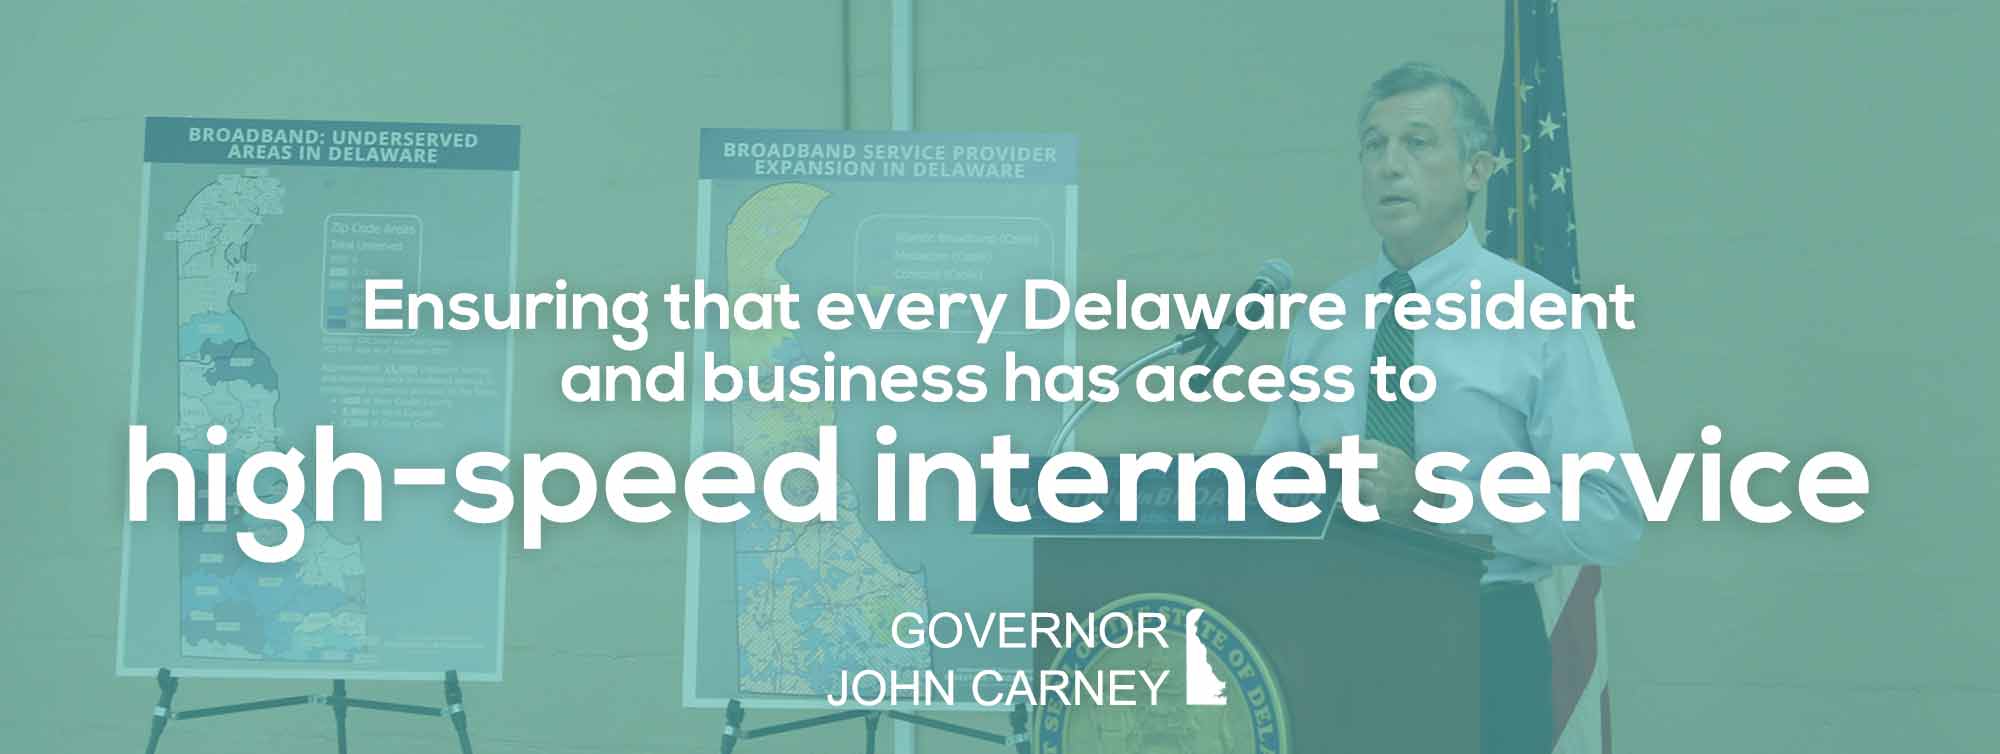 Delaware's Governor Carney talking to a group of people about ensuring that every Delaware resident and business has access to high-speed internet service.